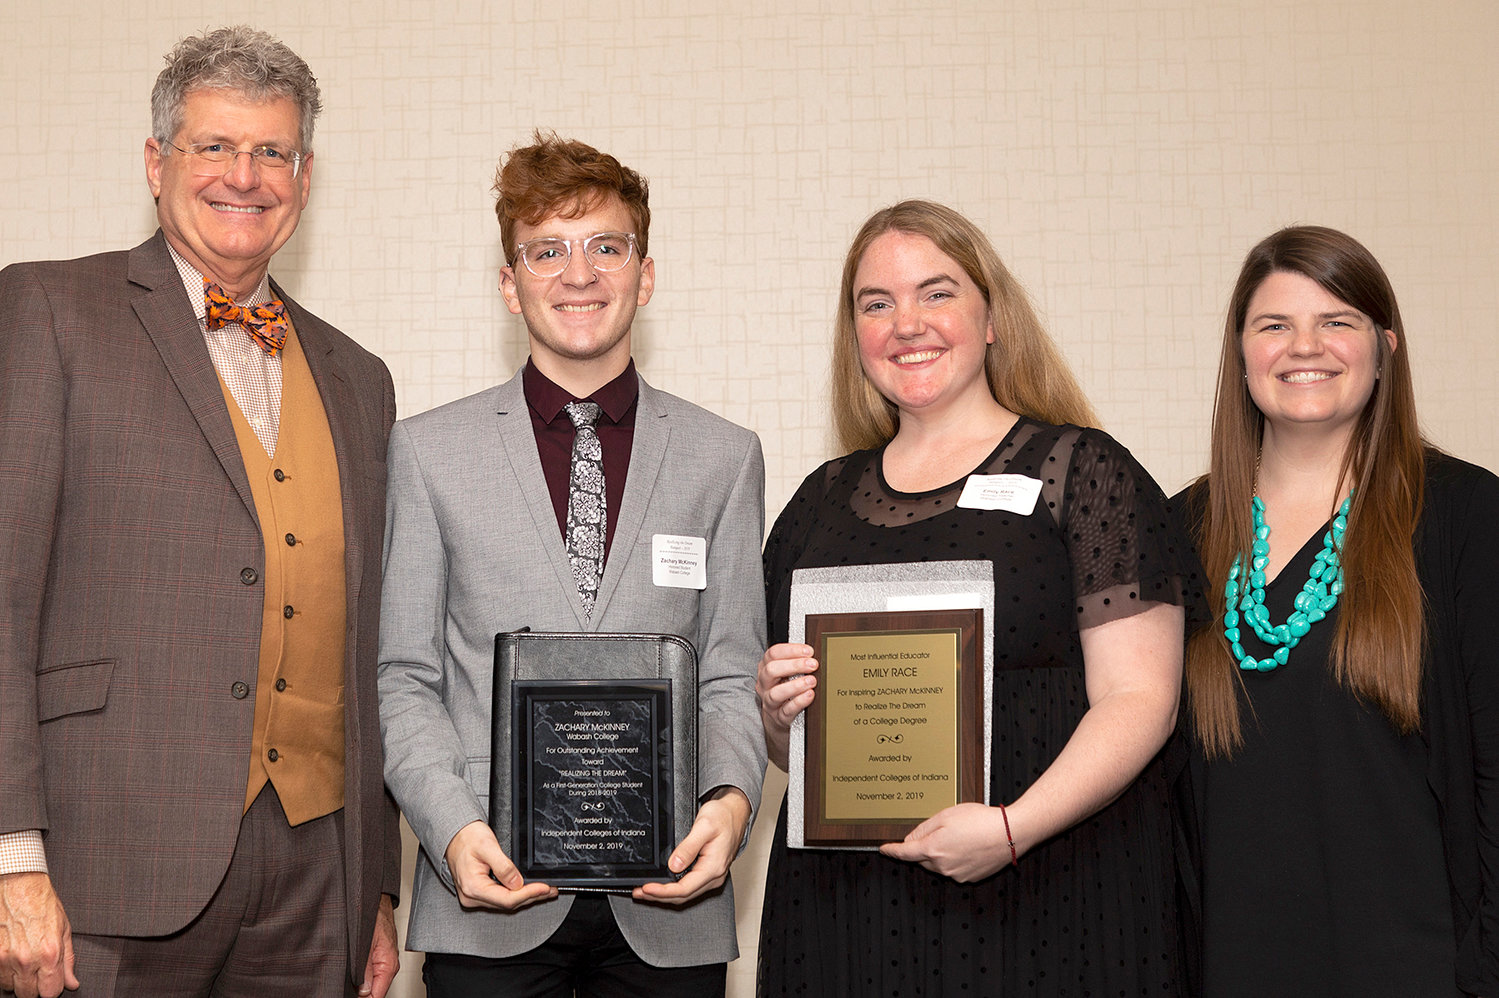 Pictured from left are David W. Wantz, Independent Colleges of Indiana president; Zachary McKinney ‘22; Emily Race, Crawfordsville High School teacher; and Sally Reasoner, Ascend Indiana Vice President of Talent Identification. On Nov. 2, McKinney received his “Realizing the Dream” award from the Independent Colleges of Indiana, a $3,000 scholarship. For being McKinney’s mentor, Race received a $1,000 professional development award.